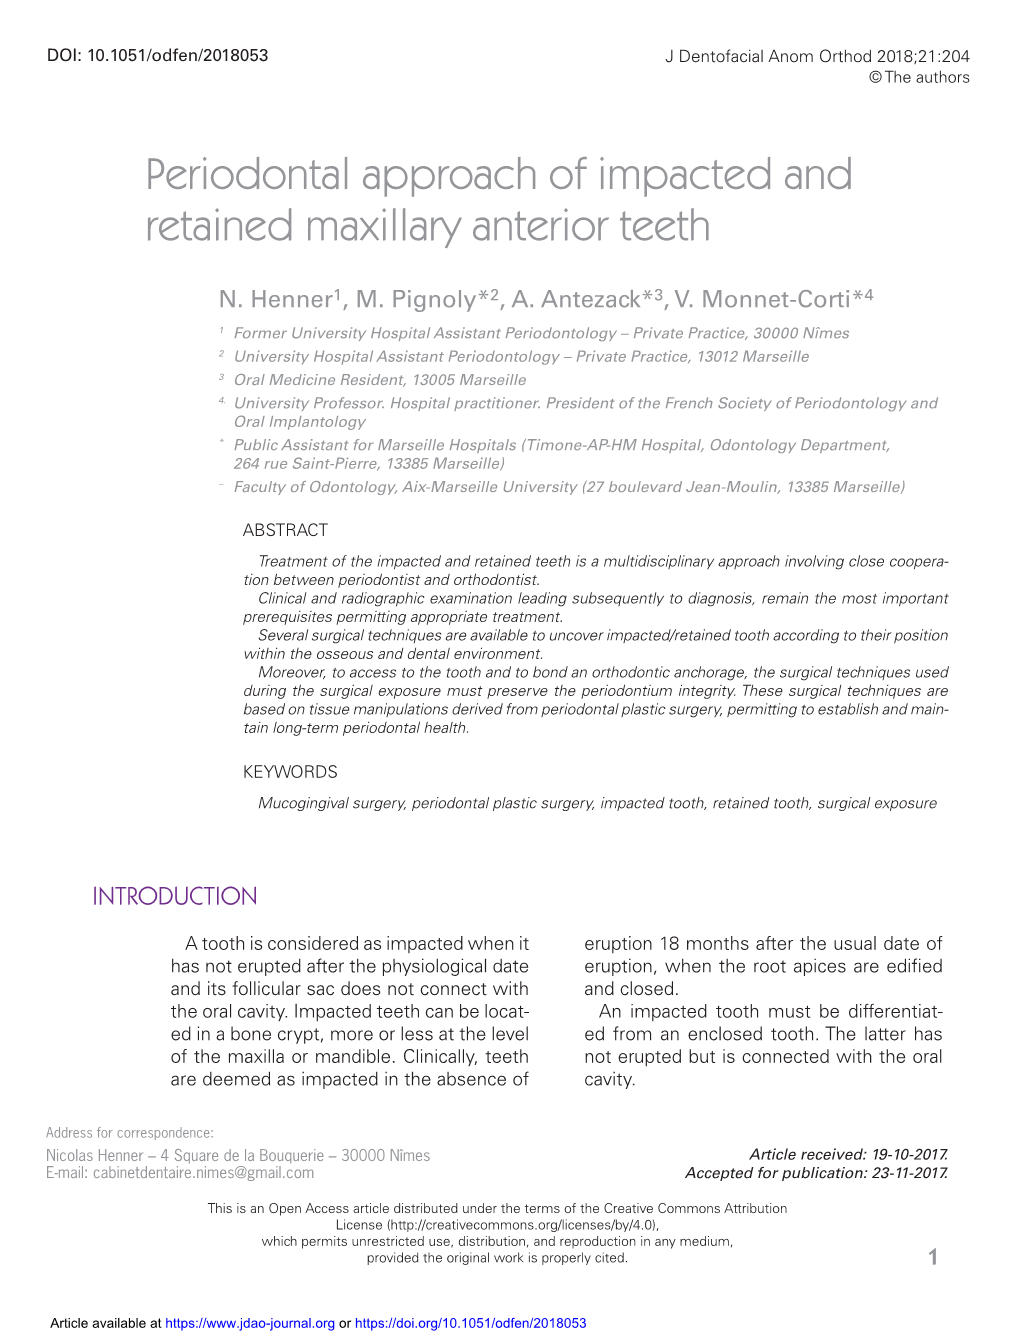 Periodontal Approach of Impacted and Retained Maxillary Anterior Teeth